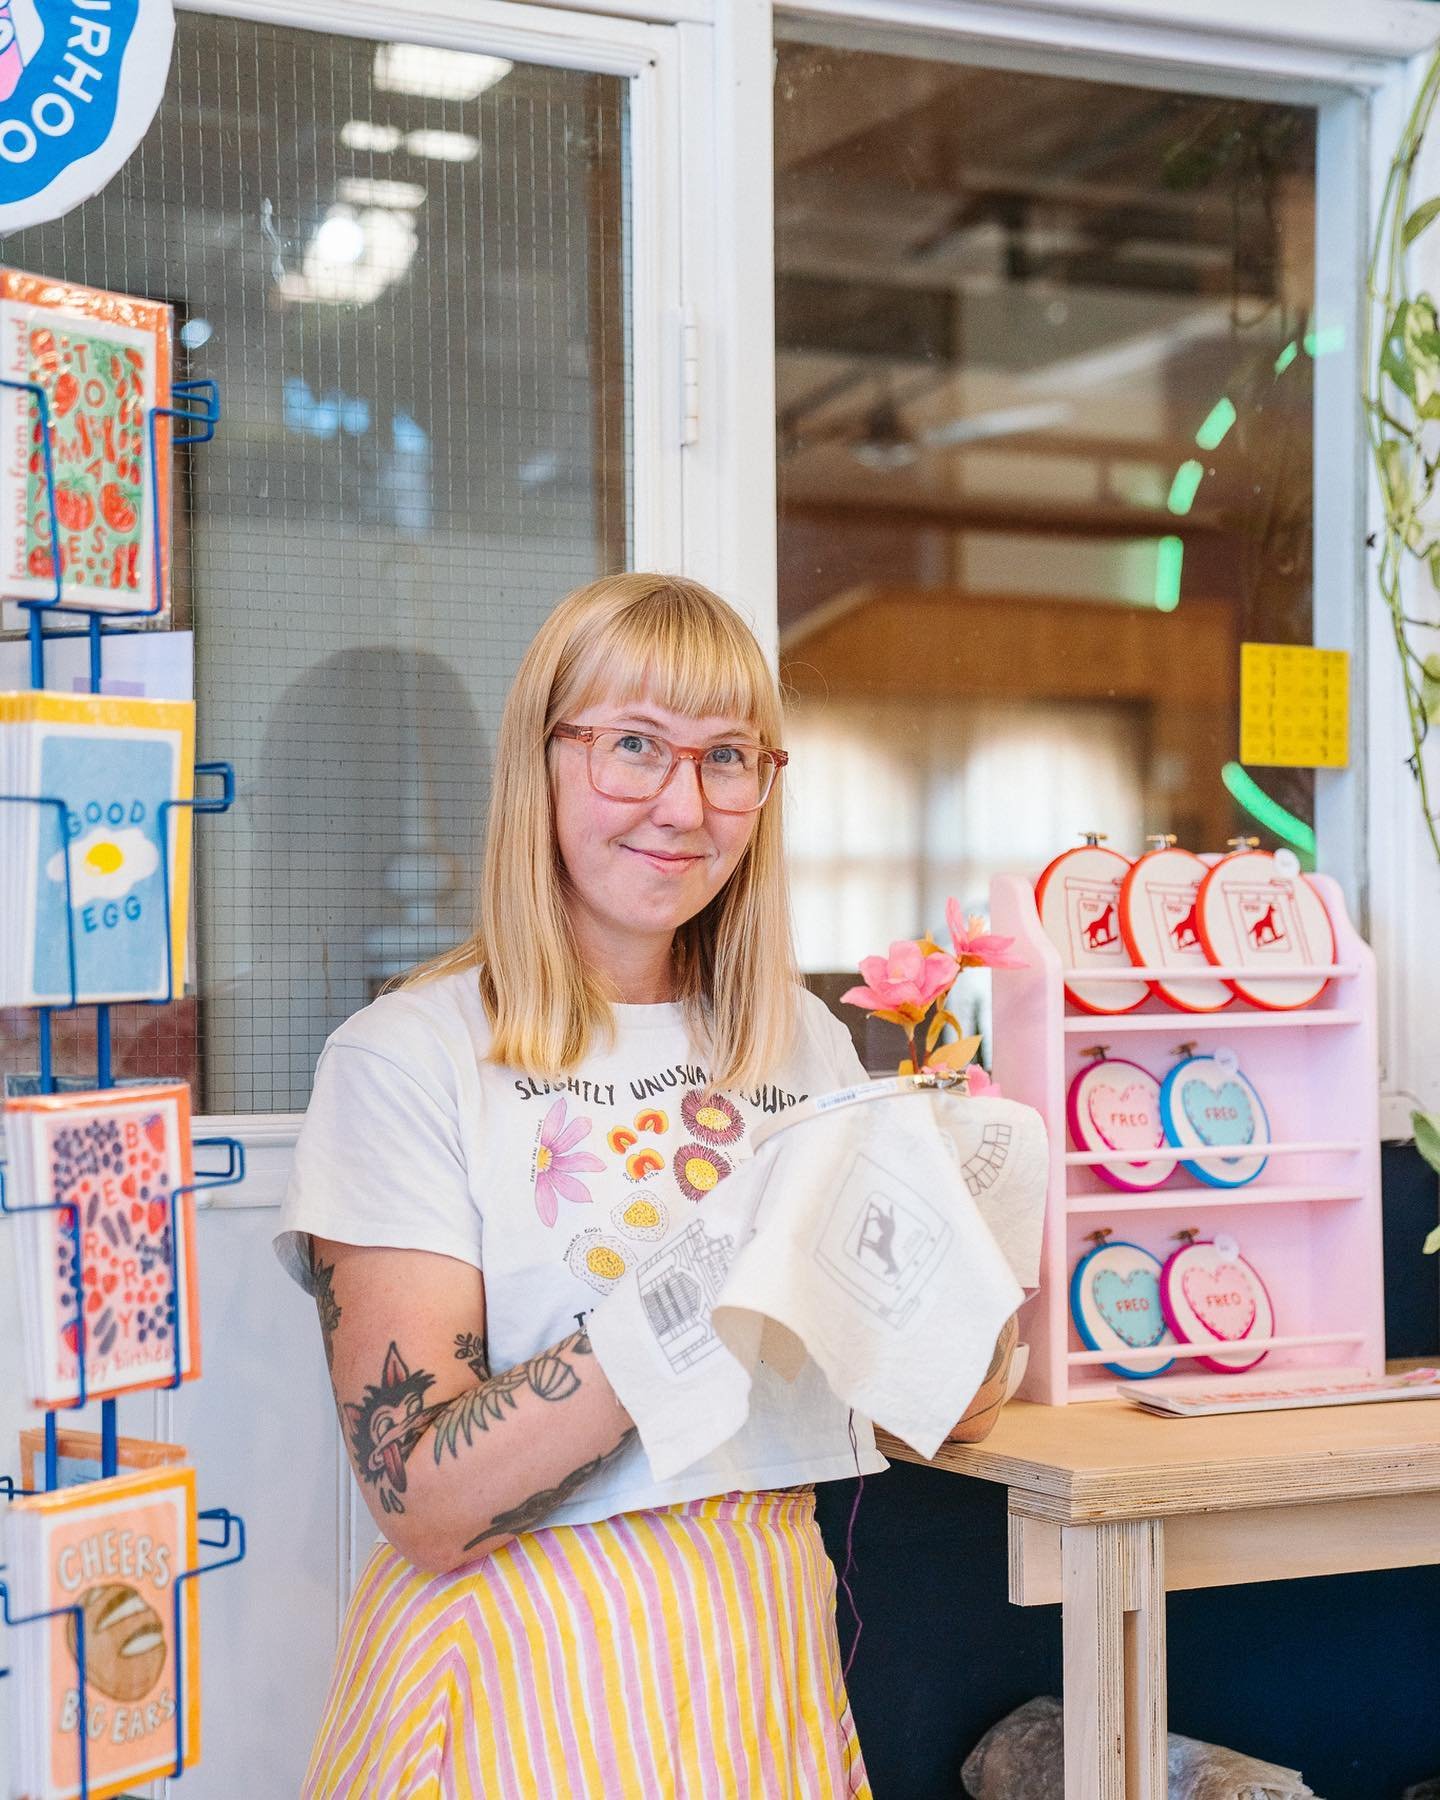 Ummm, am I the cutest little shop keeper or what?! I had a fab day stitching, selling my goodies and yapping to everyone at the beautiful makers pop-up shop organised by @neighbourhoodpress at @stackwood_ on Saturday 💘 

This was my first time doing